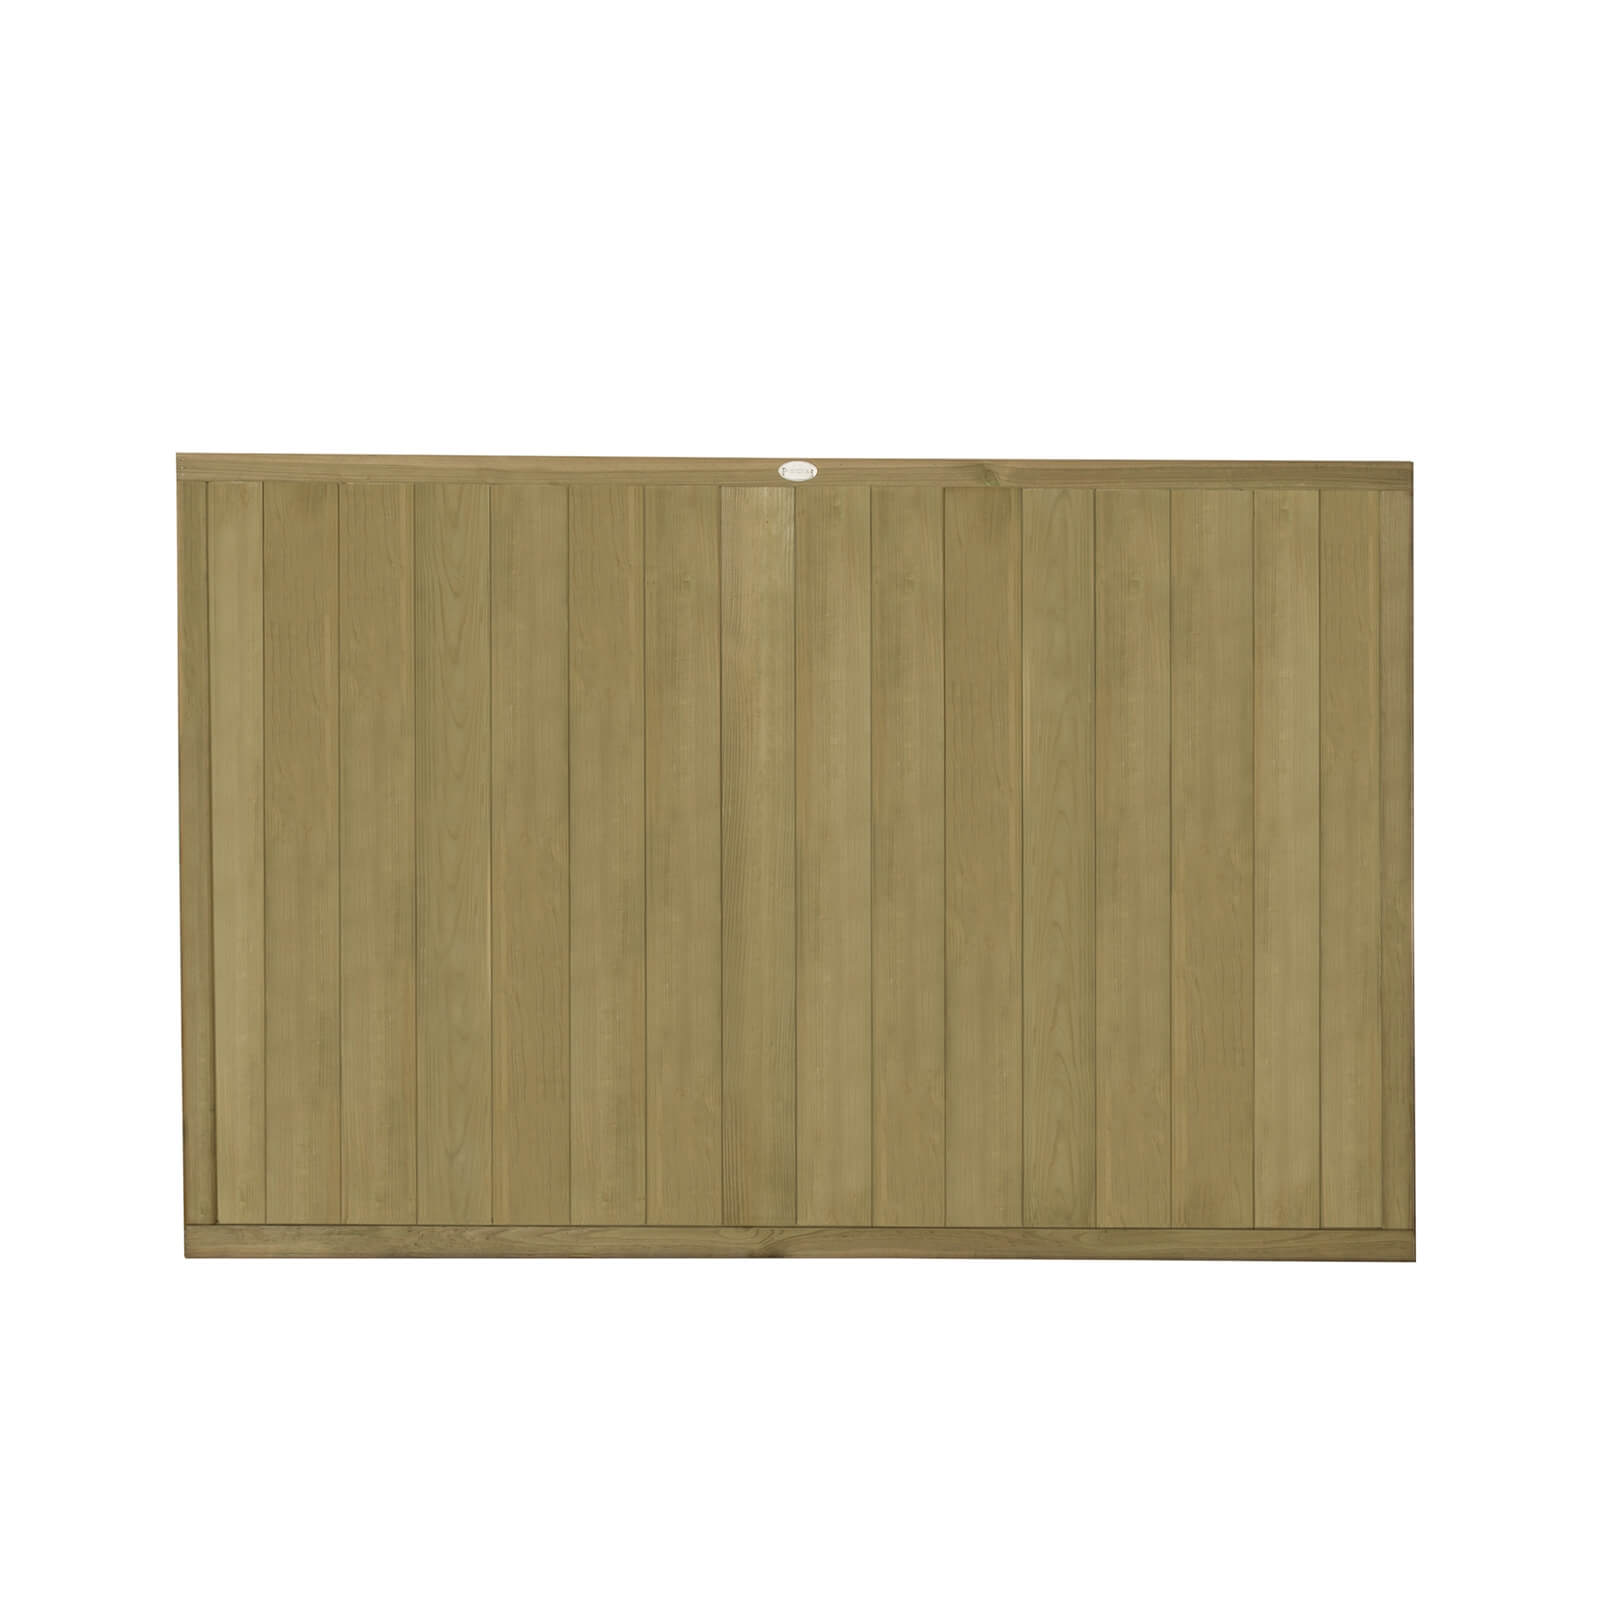 Forest Vertical Tongue & Groove Fence Panel - 4ft - Pack of 5